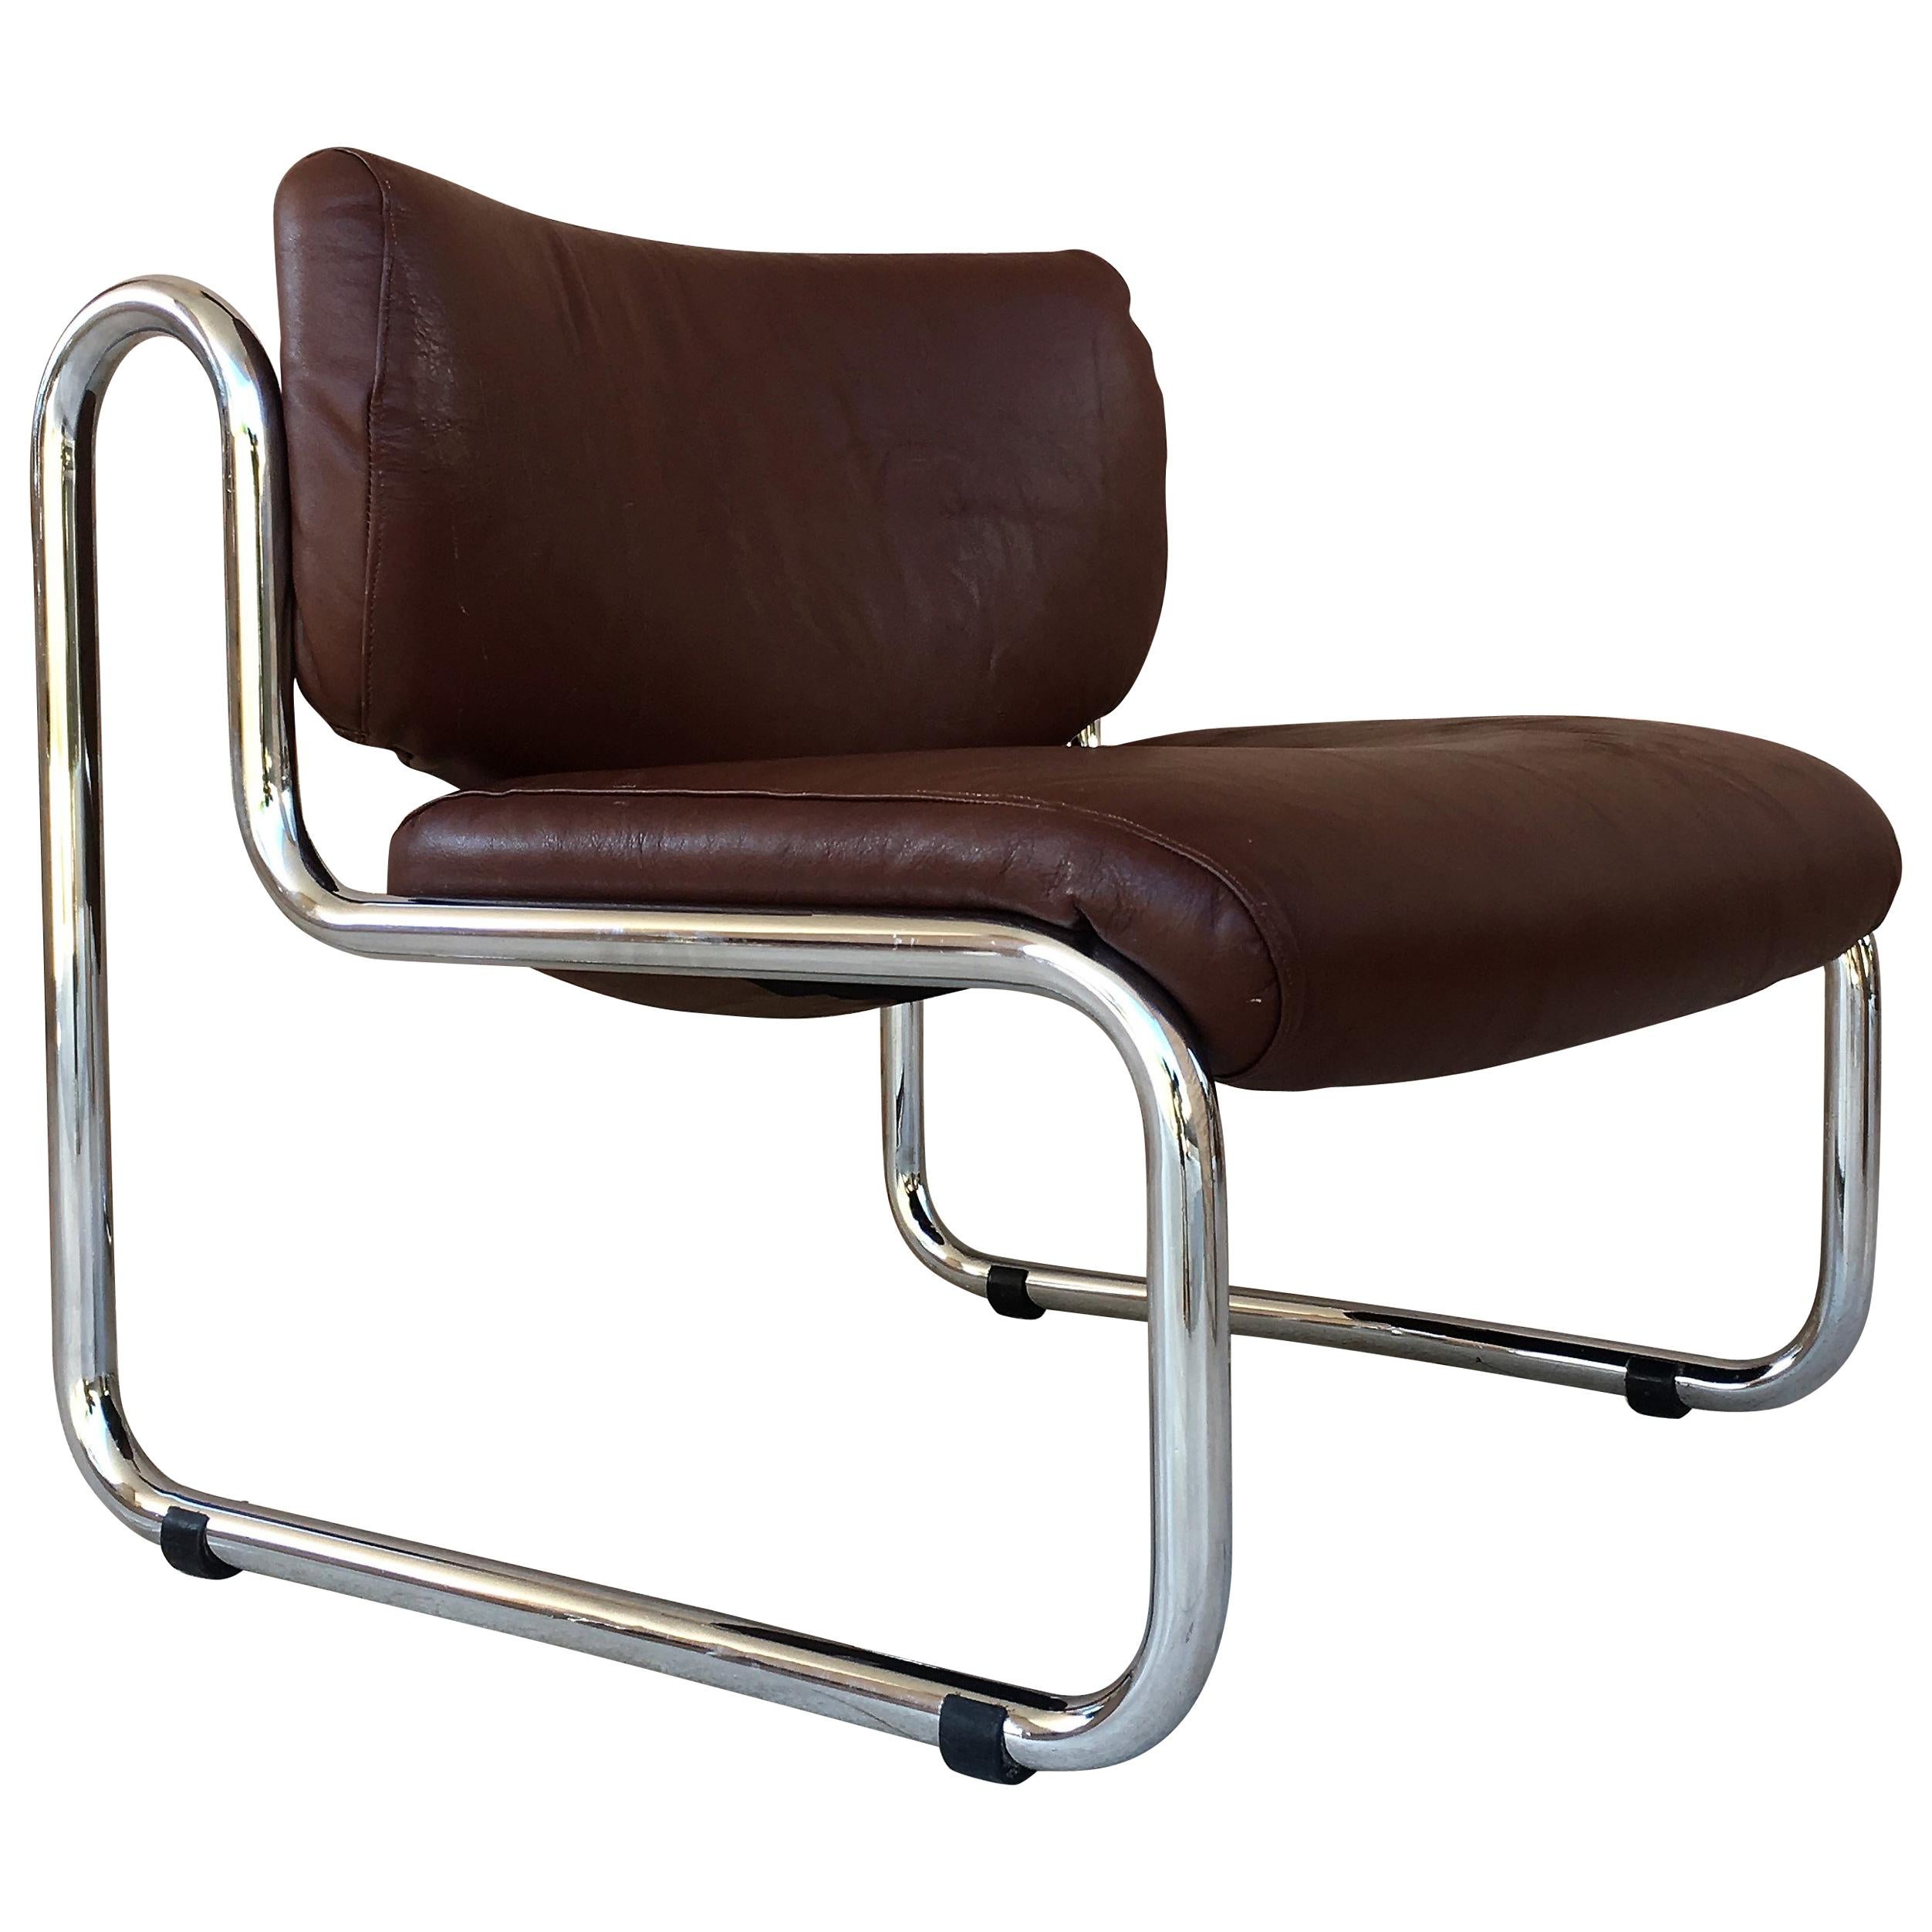 Midcentury Sculptural Chrome and Leather Italian Lounge Chair